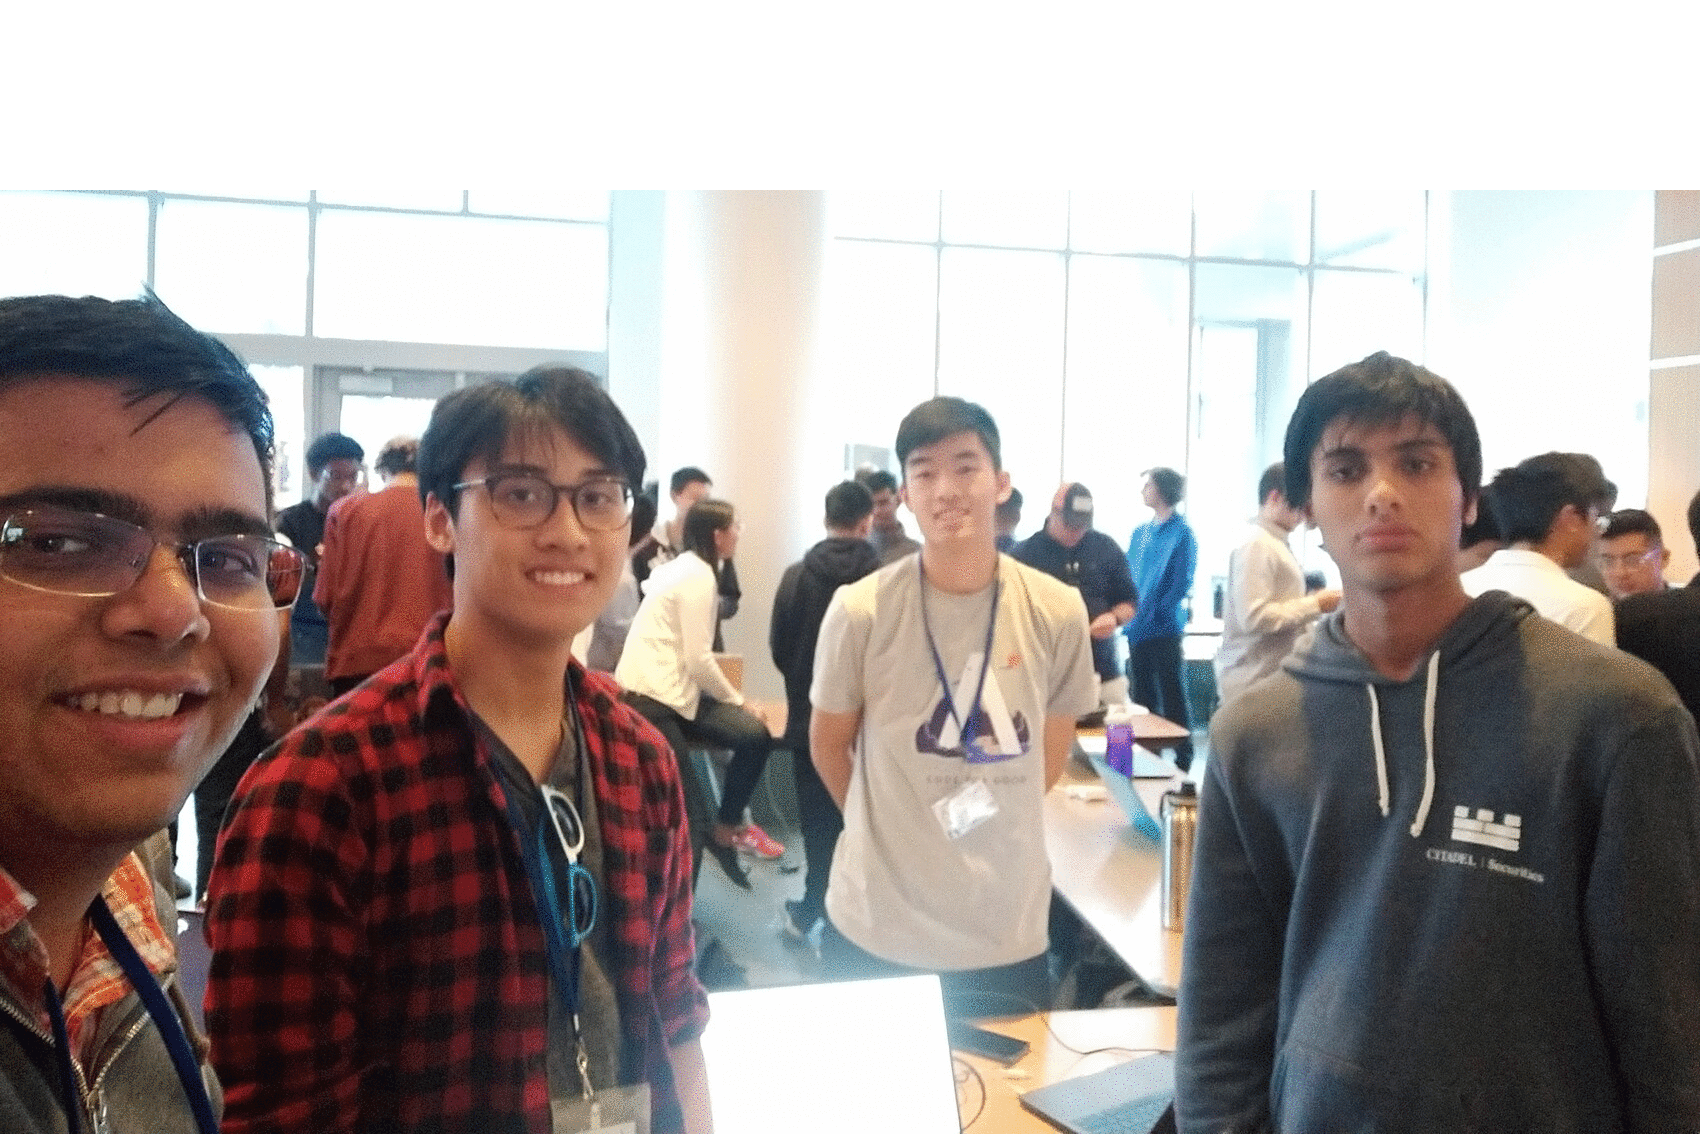 Presenting the MediScan project at HackDuke 2019